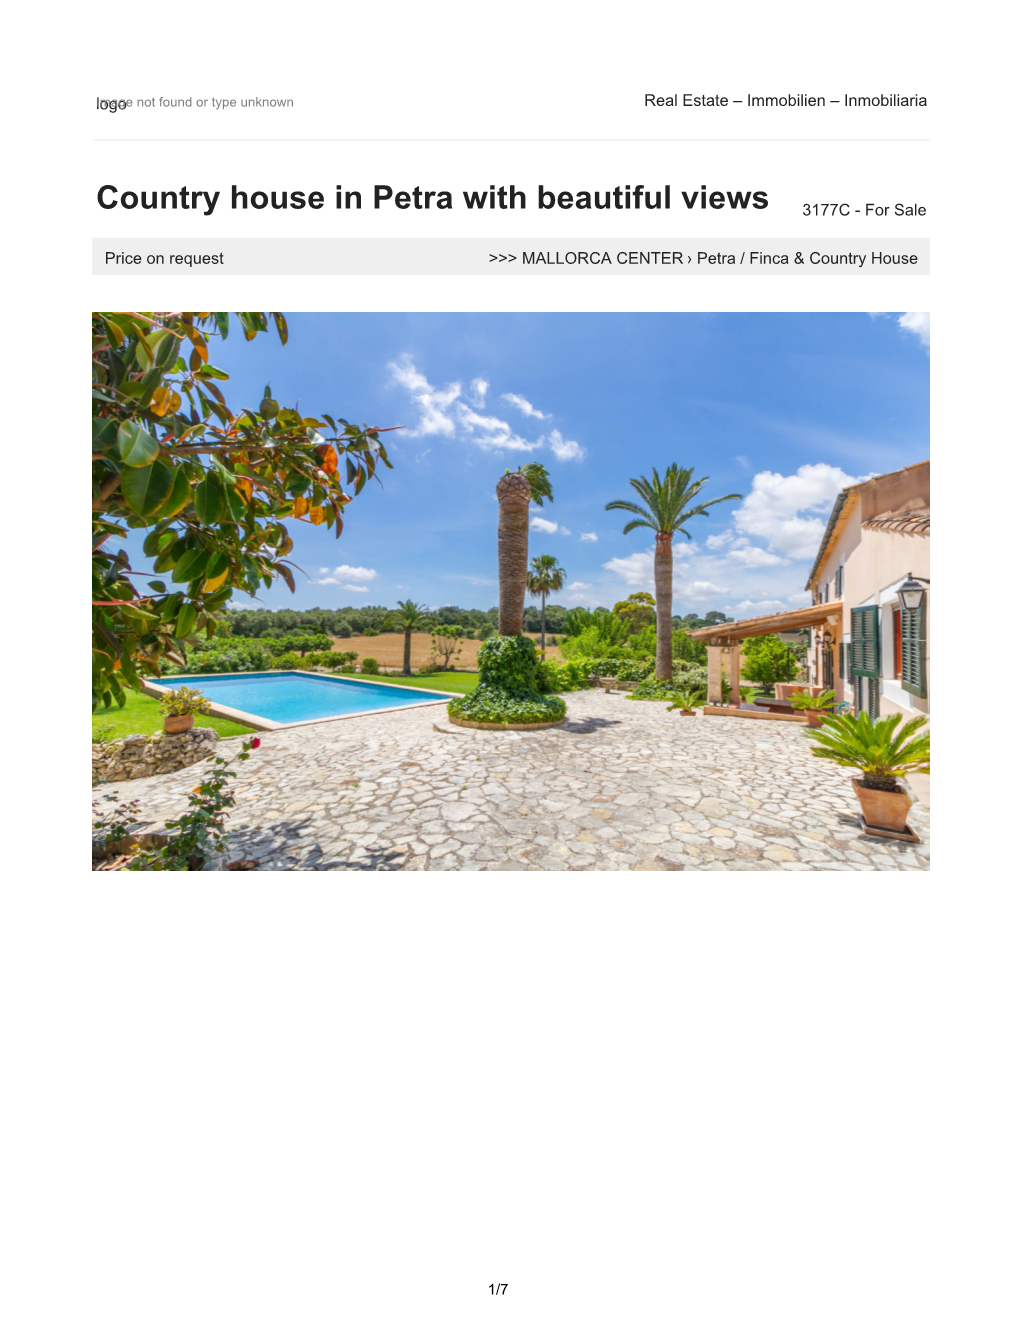 Country House in Petra with Beautiful Views 3177C - for Sale